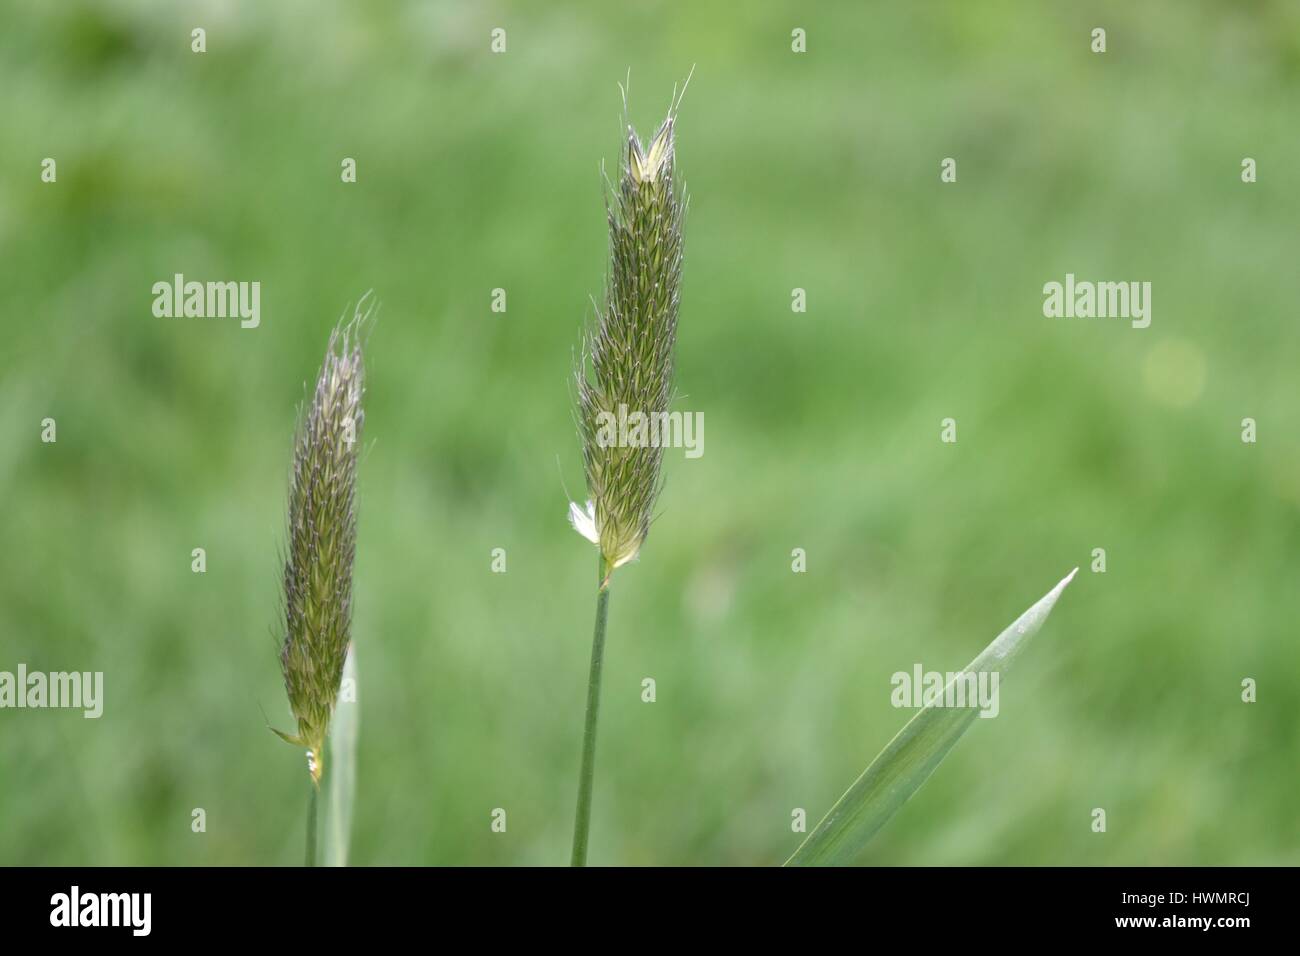 Two seedheads of Meadow Foxtail grass  (Alopecurus pratensis) Stock Photo